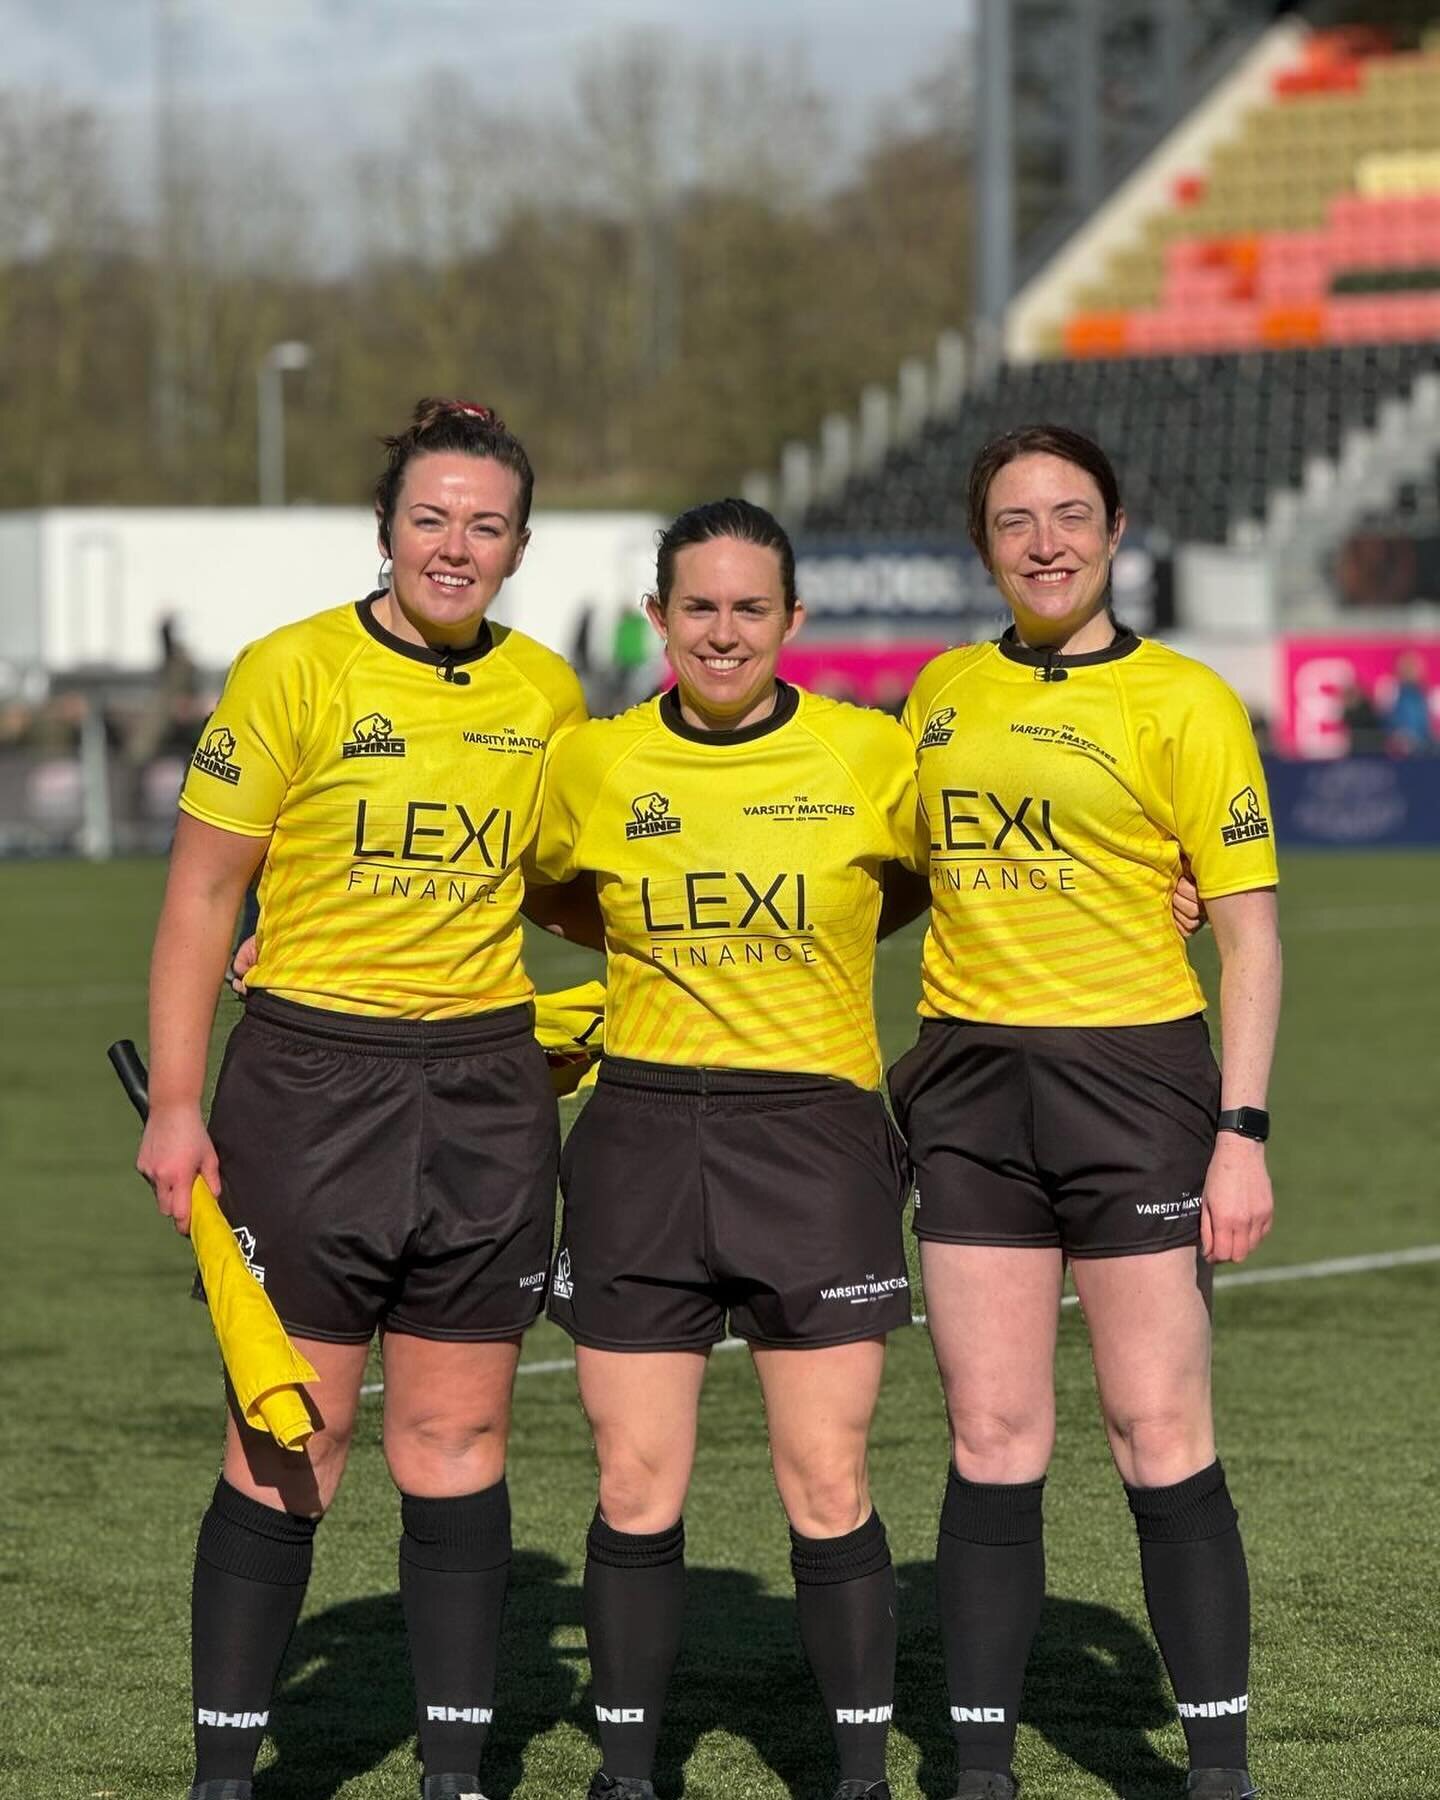 Congratulations to @melthereferee who refereed the Women&rsquo;s Varsity between Oxford and Cambridge today at StoneX - fantastic achievement! #lsrfur